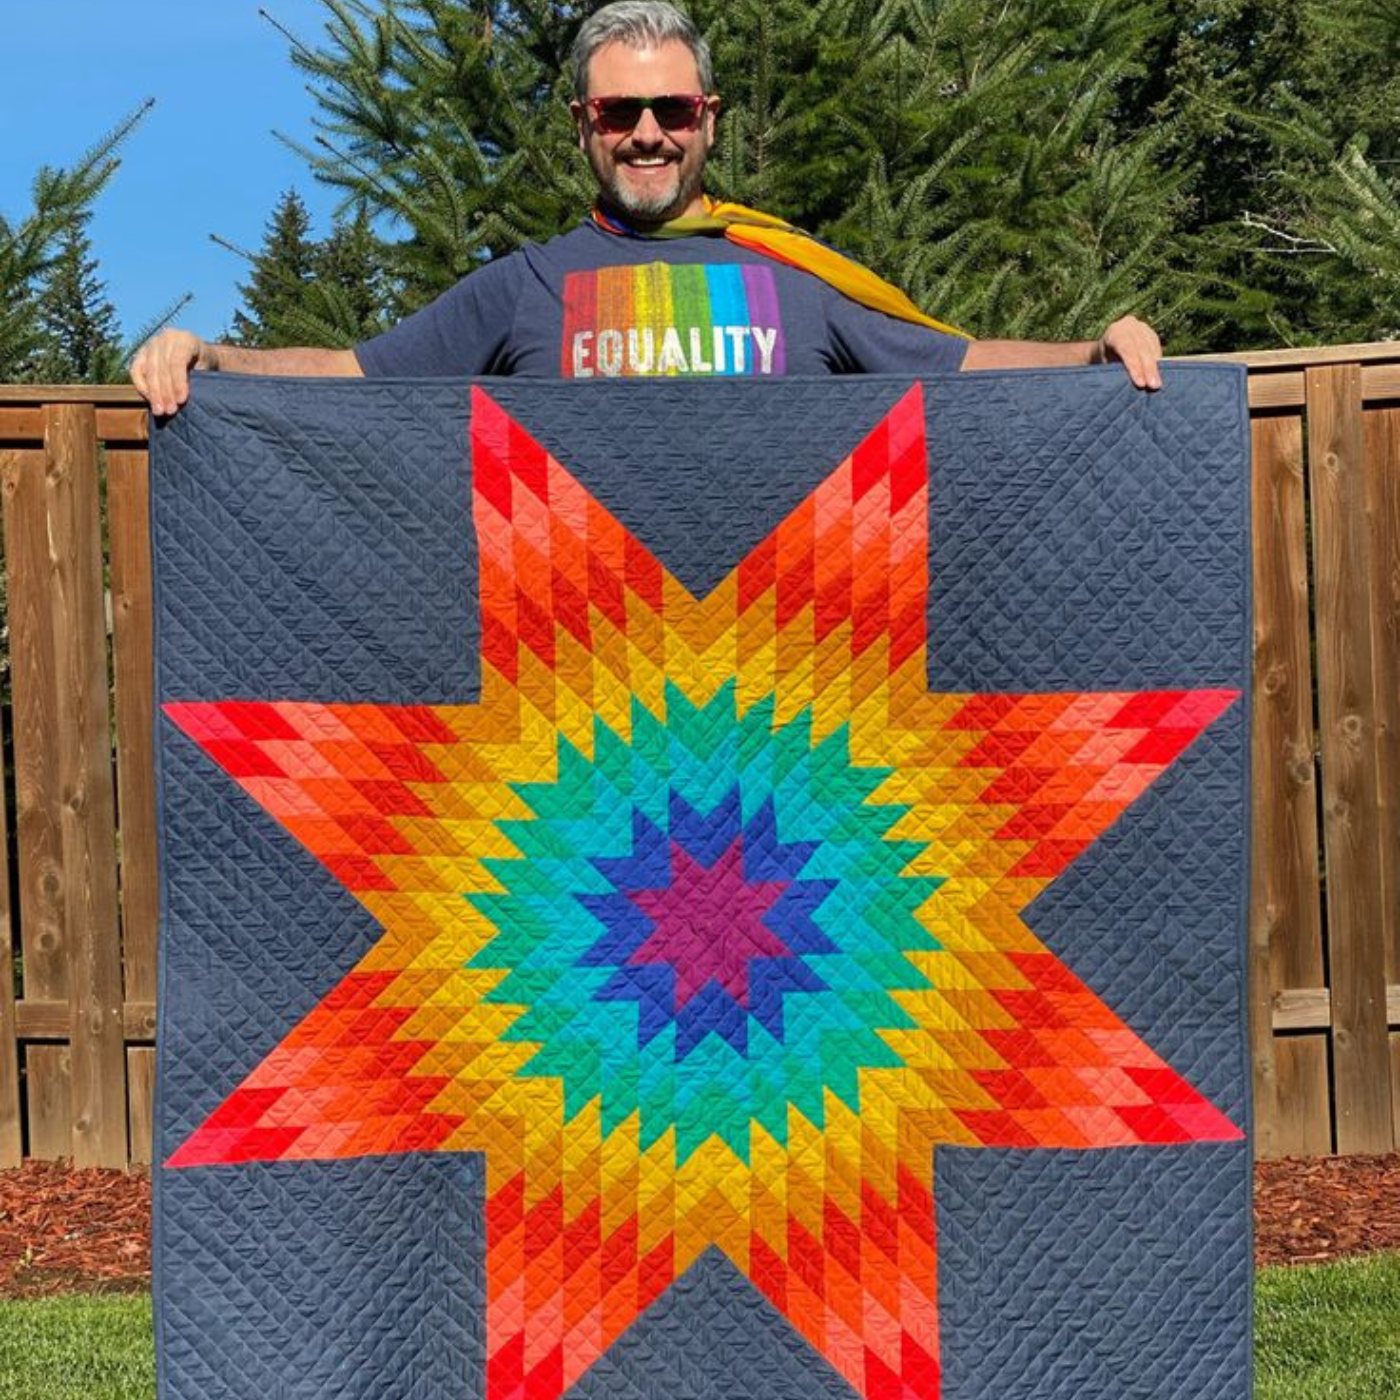 Mathew is looking at the camera and smiling, holding up a quilt with a gray background and a large rainbow star design on it. The center of the quilt is purple, then extending outward, blue, teal, green, yellow, orange and red. He is wearing sunglasses and a gray shirt with vertical rainbow stripes that says “EQUALITY” in all caps.